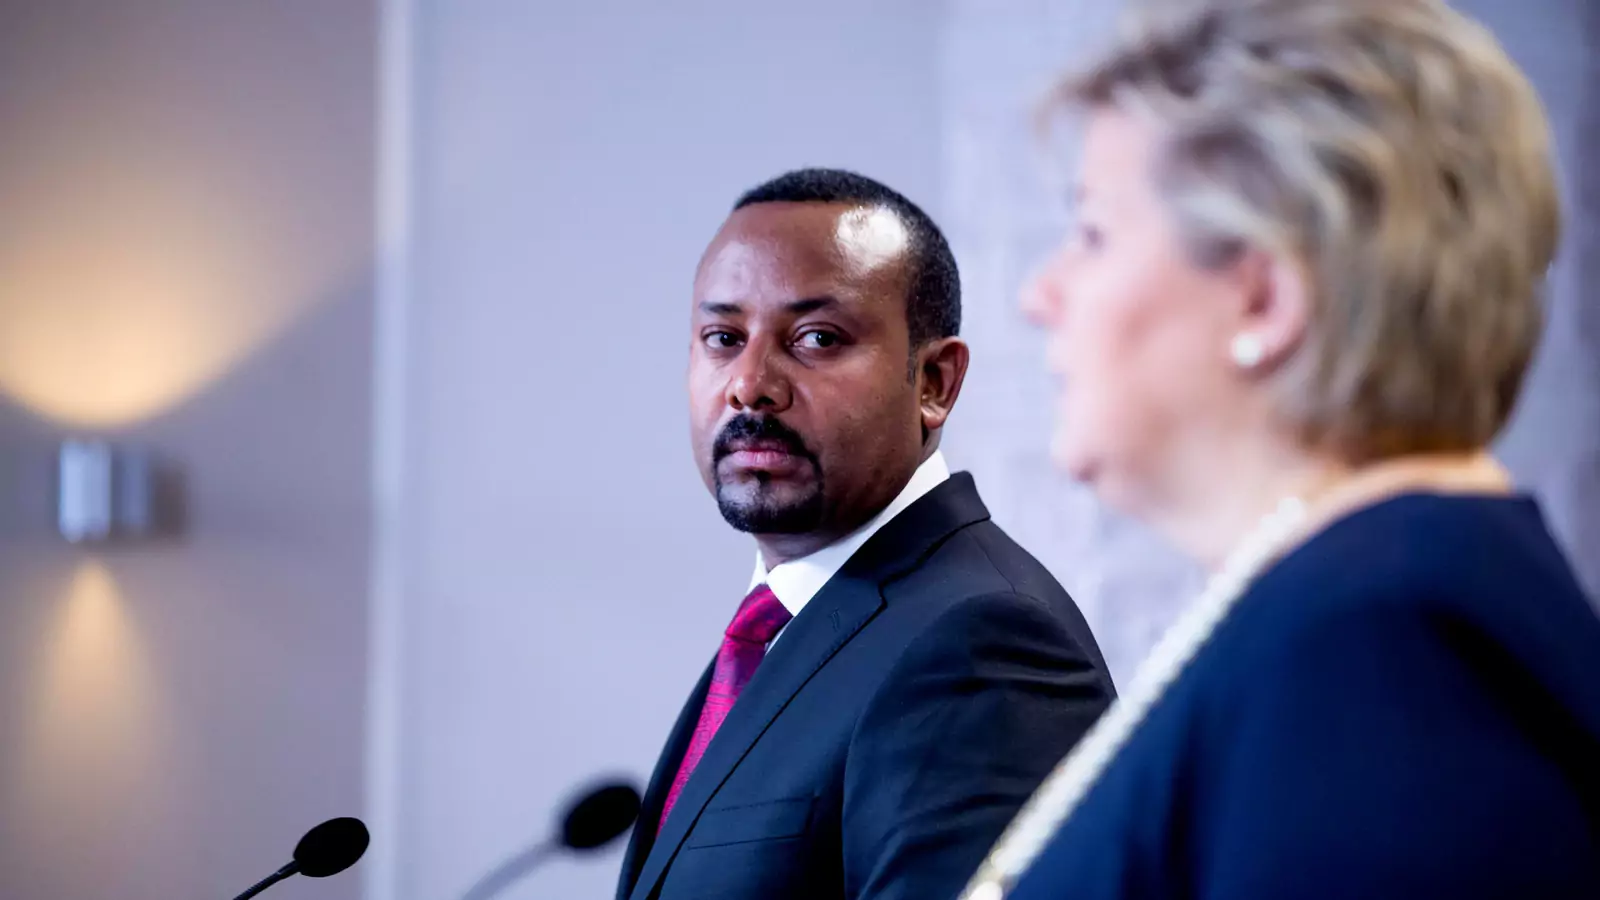 Prime Minister of Ethiopia Abiy Ahmed Ali at news conference after receiving the Nobel Peace Prize in Oslo, Norway December 11, 2019.